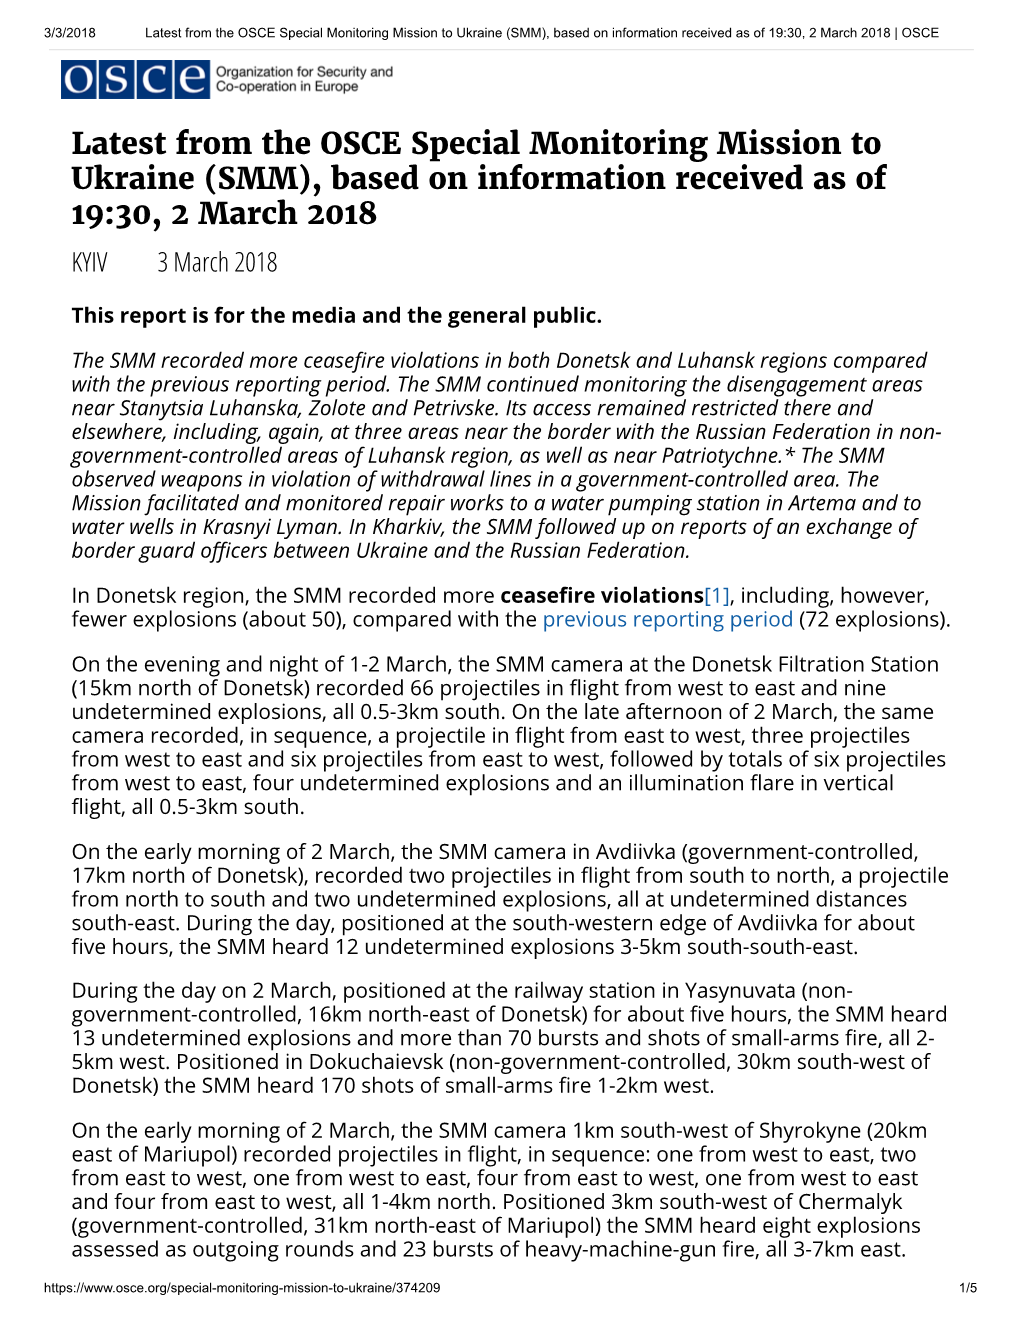 Latest from the OSCE Special Monitoring Mission to Ukraine (SMM), Based on Information Received As of 19:30, 2 March 2018 | OSCE